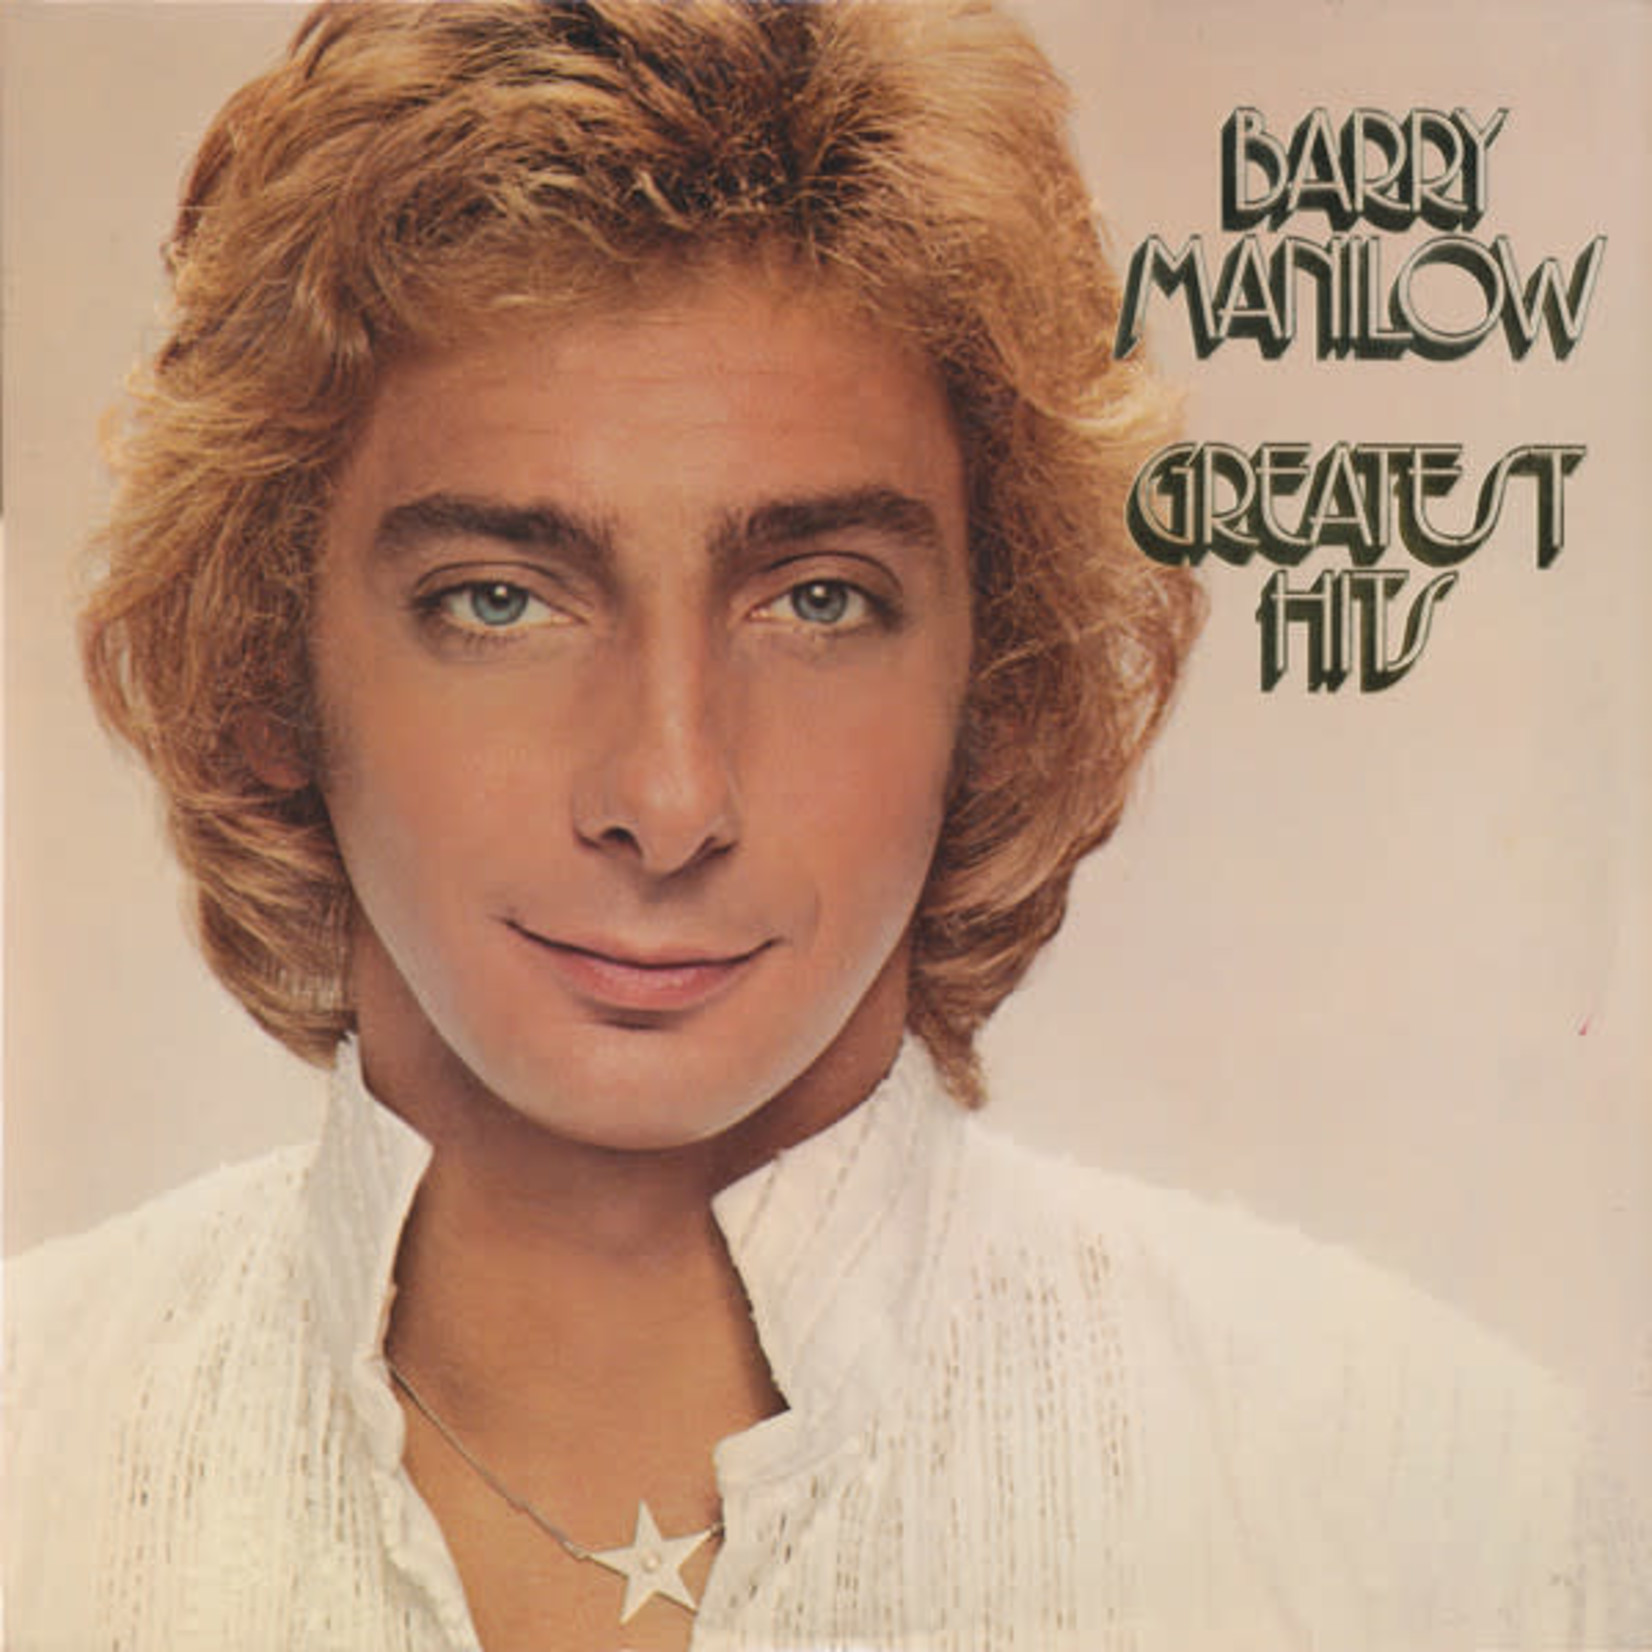 [Vintage] Barry Manilow - Greatest Hits (2LP)